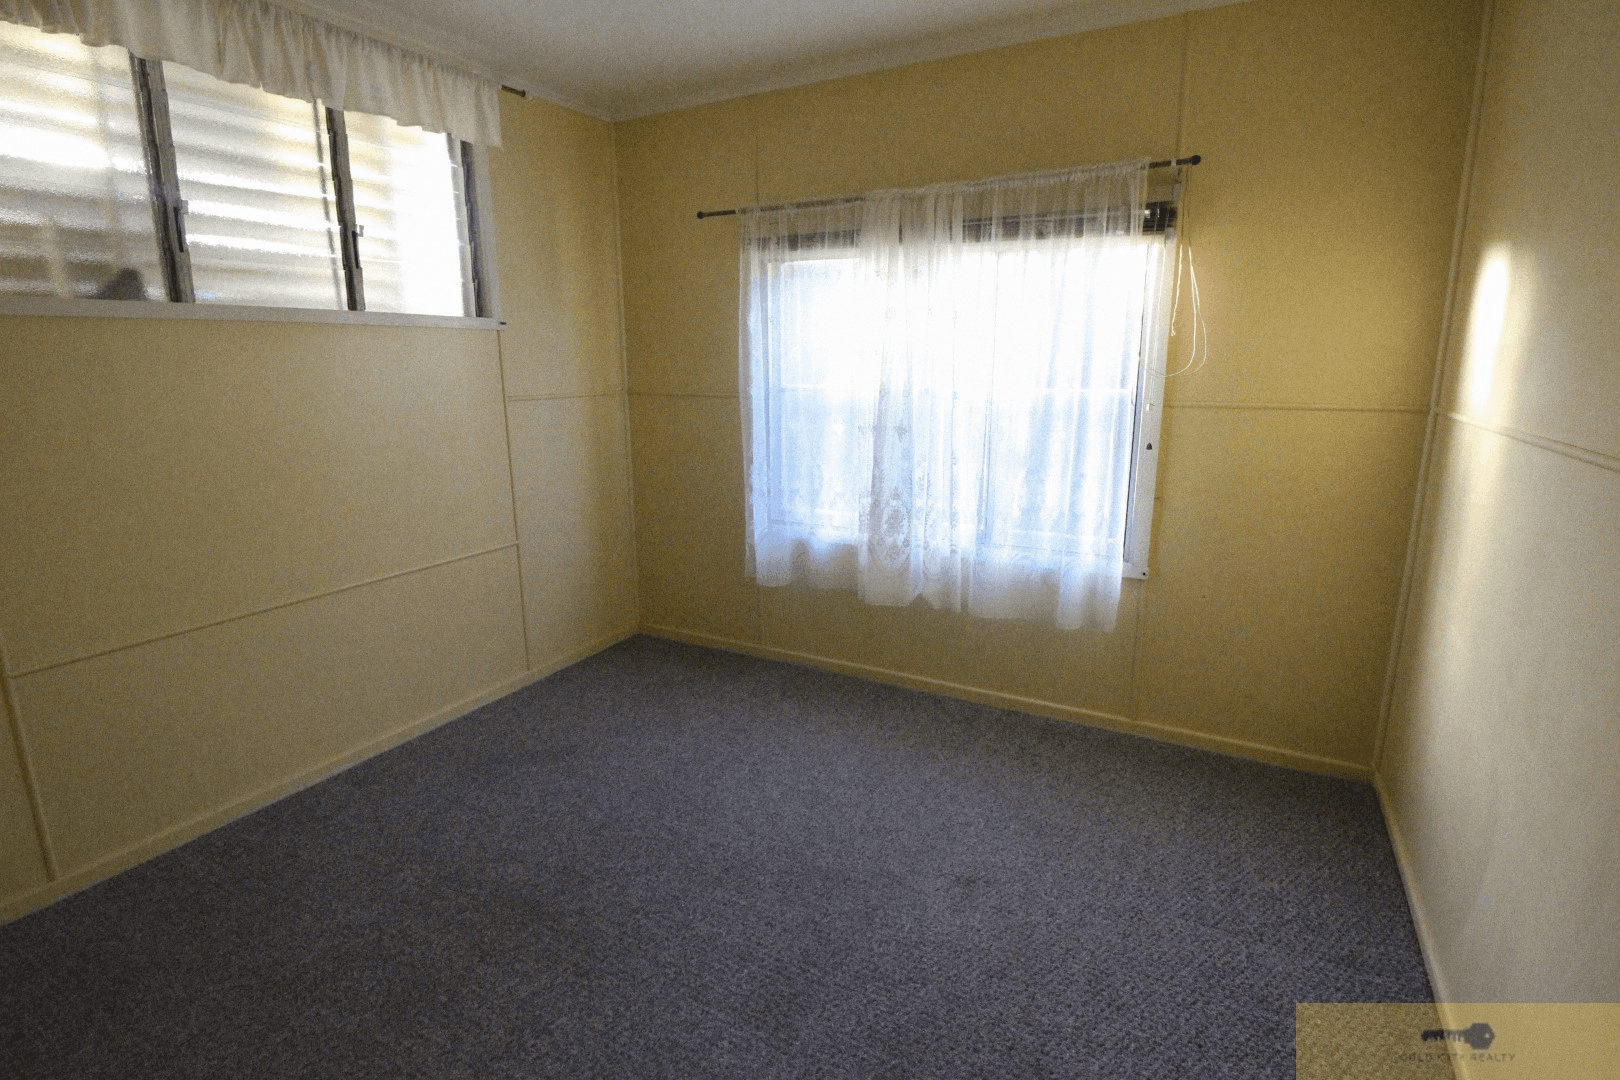 81 Mary Street, Charters Towers City, QLD 4820